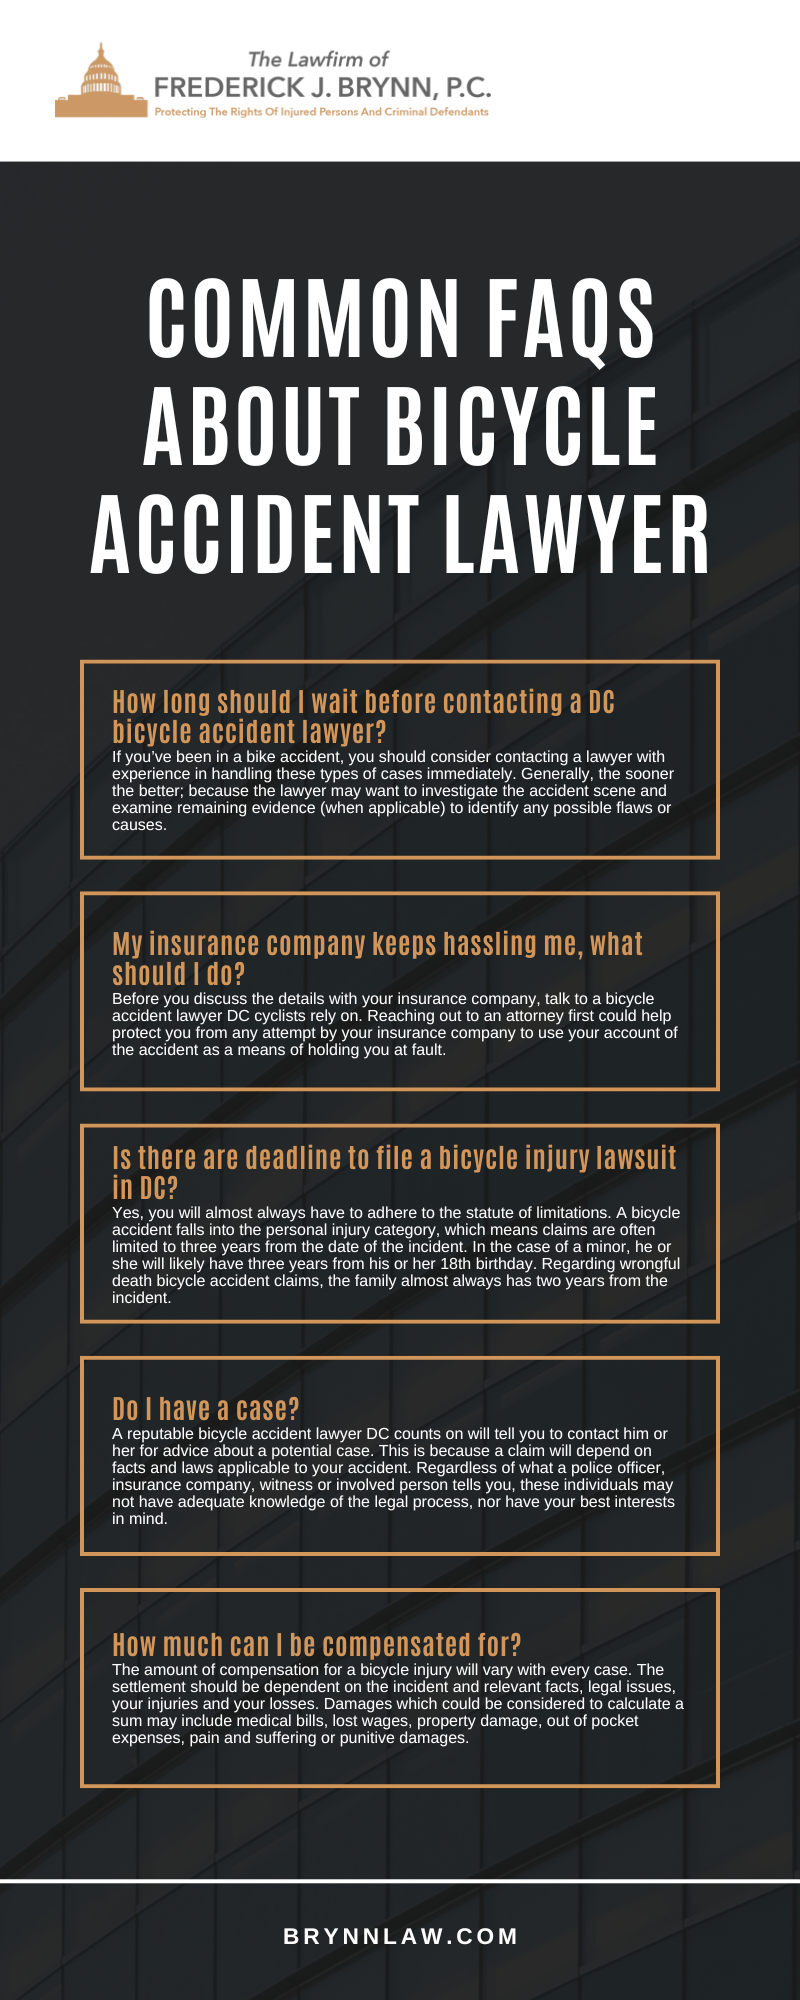 Common FAQs About Bicycle Accident Lawyer Infographic